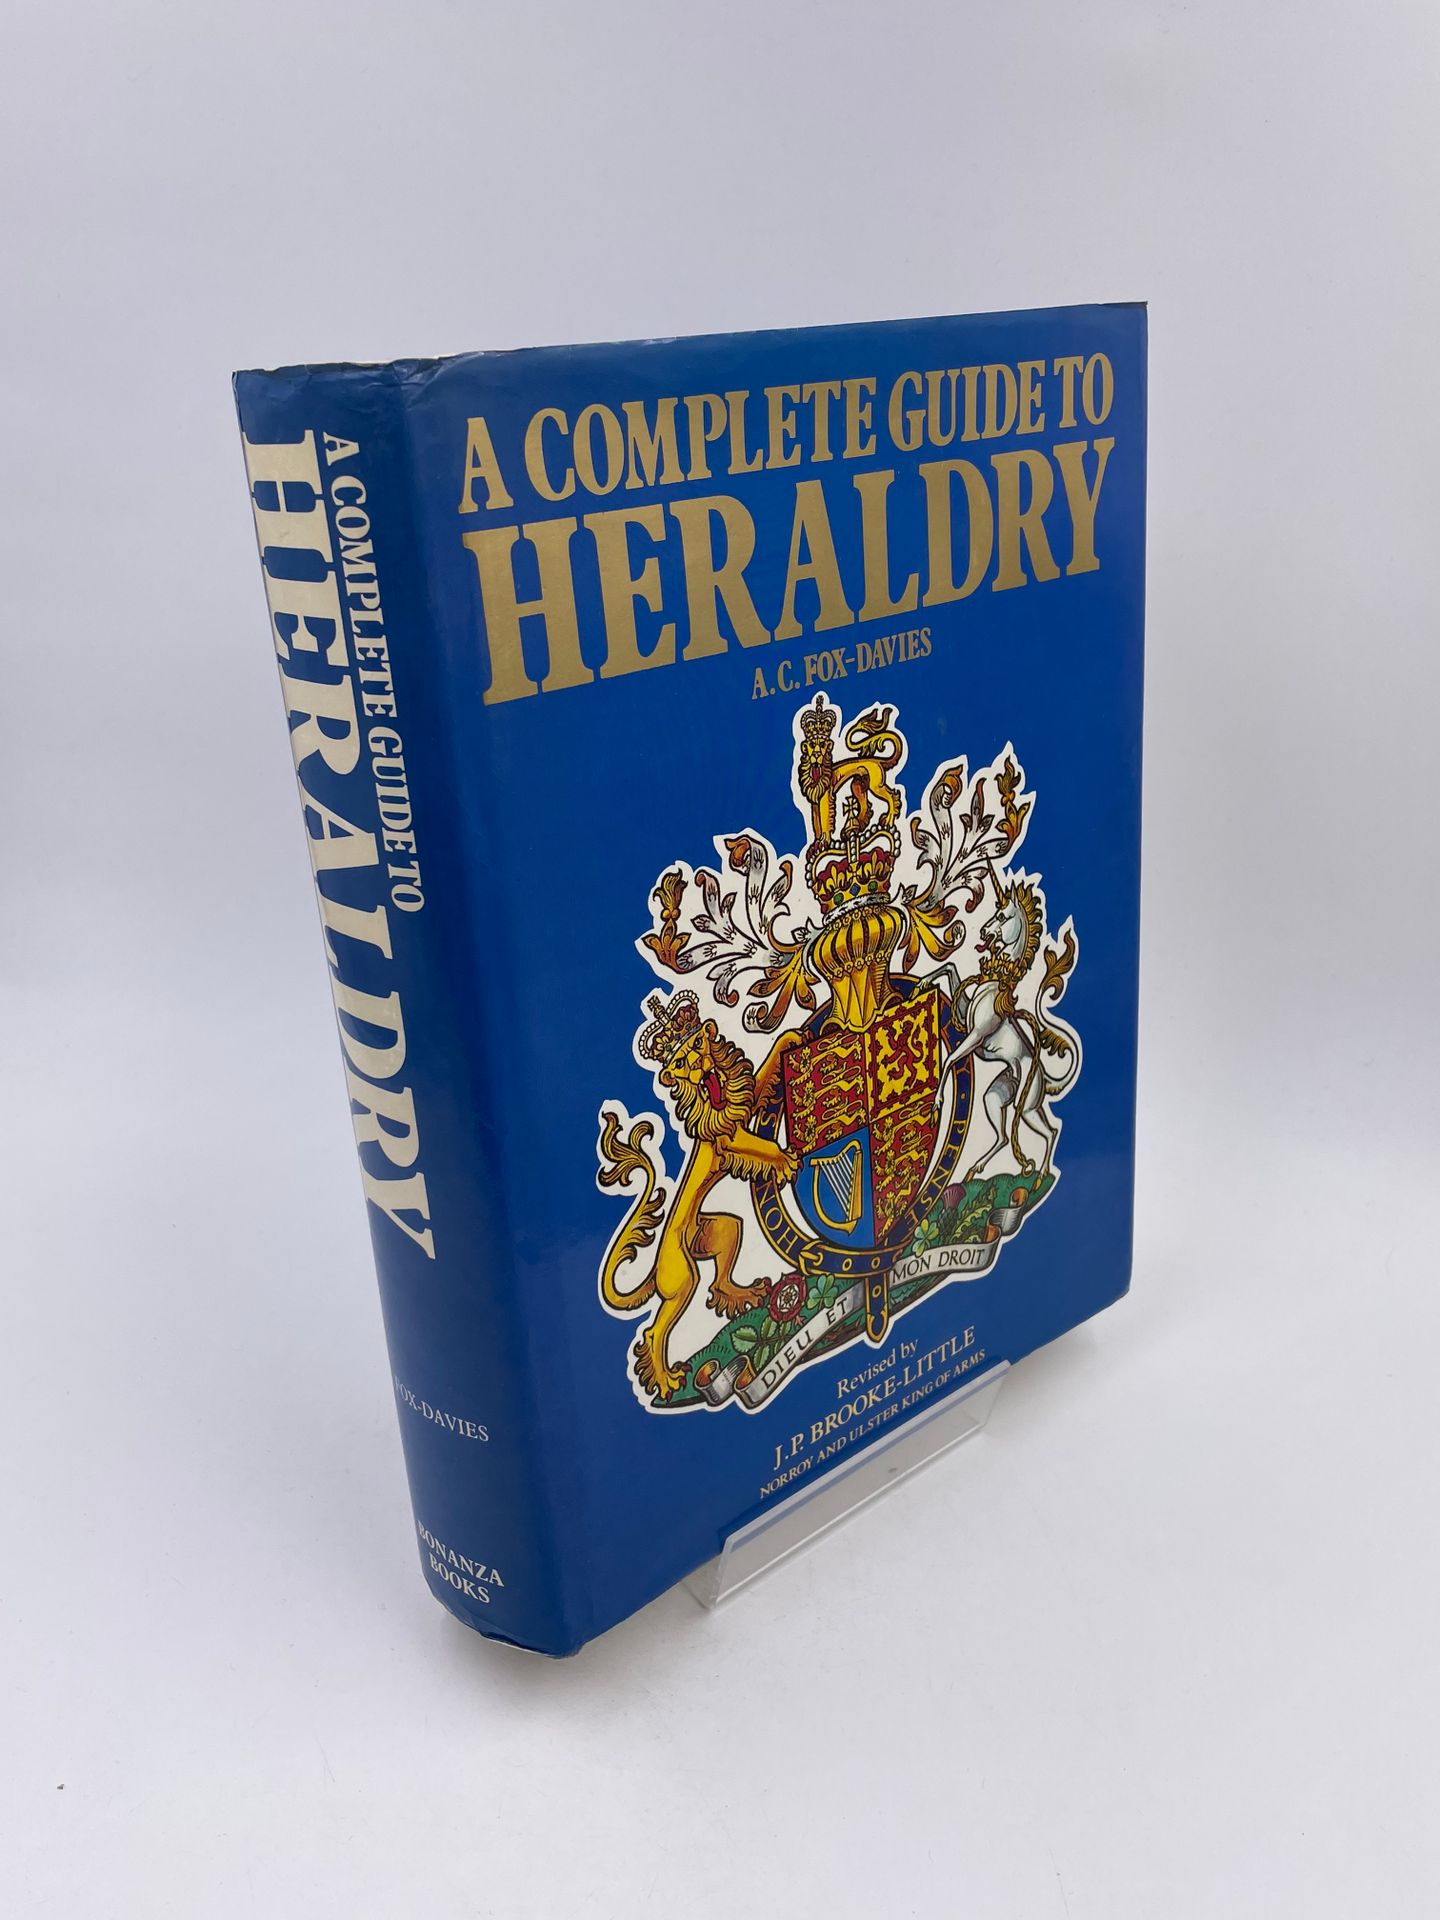 Null 1 Volume : "A COMPLETE GUIDE TO HERALDRY", A. C. Fox-Davies, Revised and An&hellip;